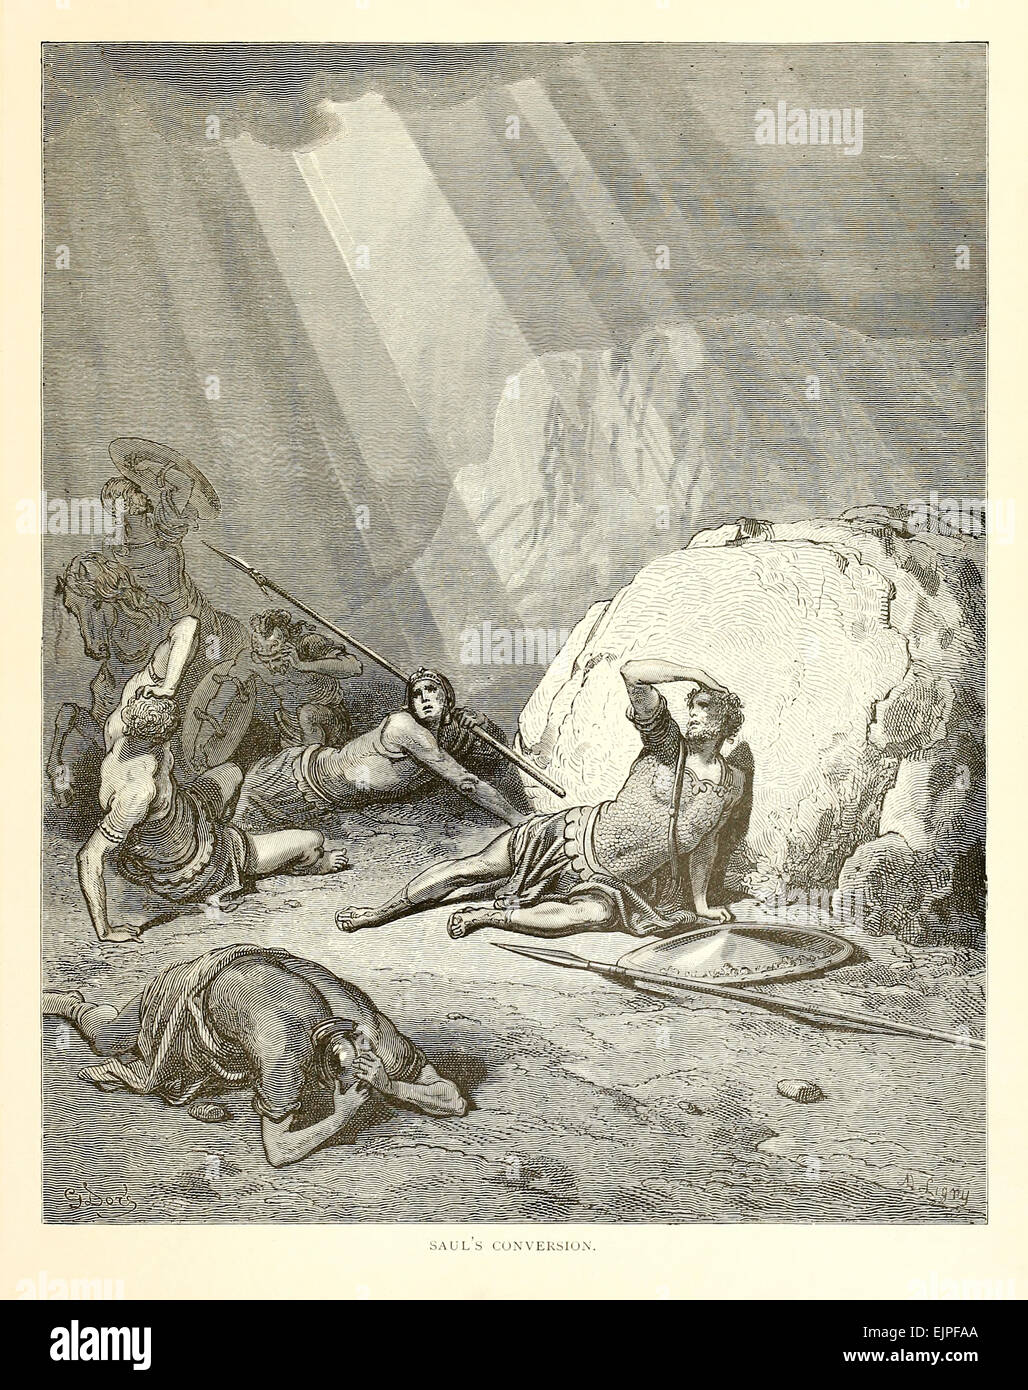 Saul's Conversion - llustration by Paul Gustave Doré (1832-1883) from 1880 edition of the Bible. See description for more information. Stock Photo